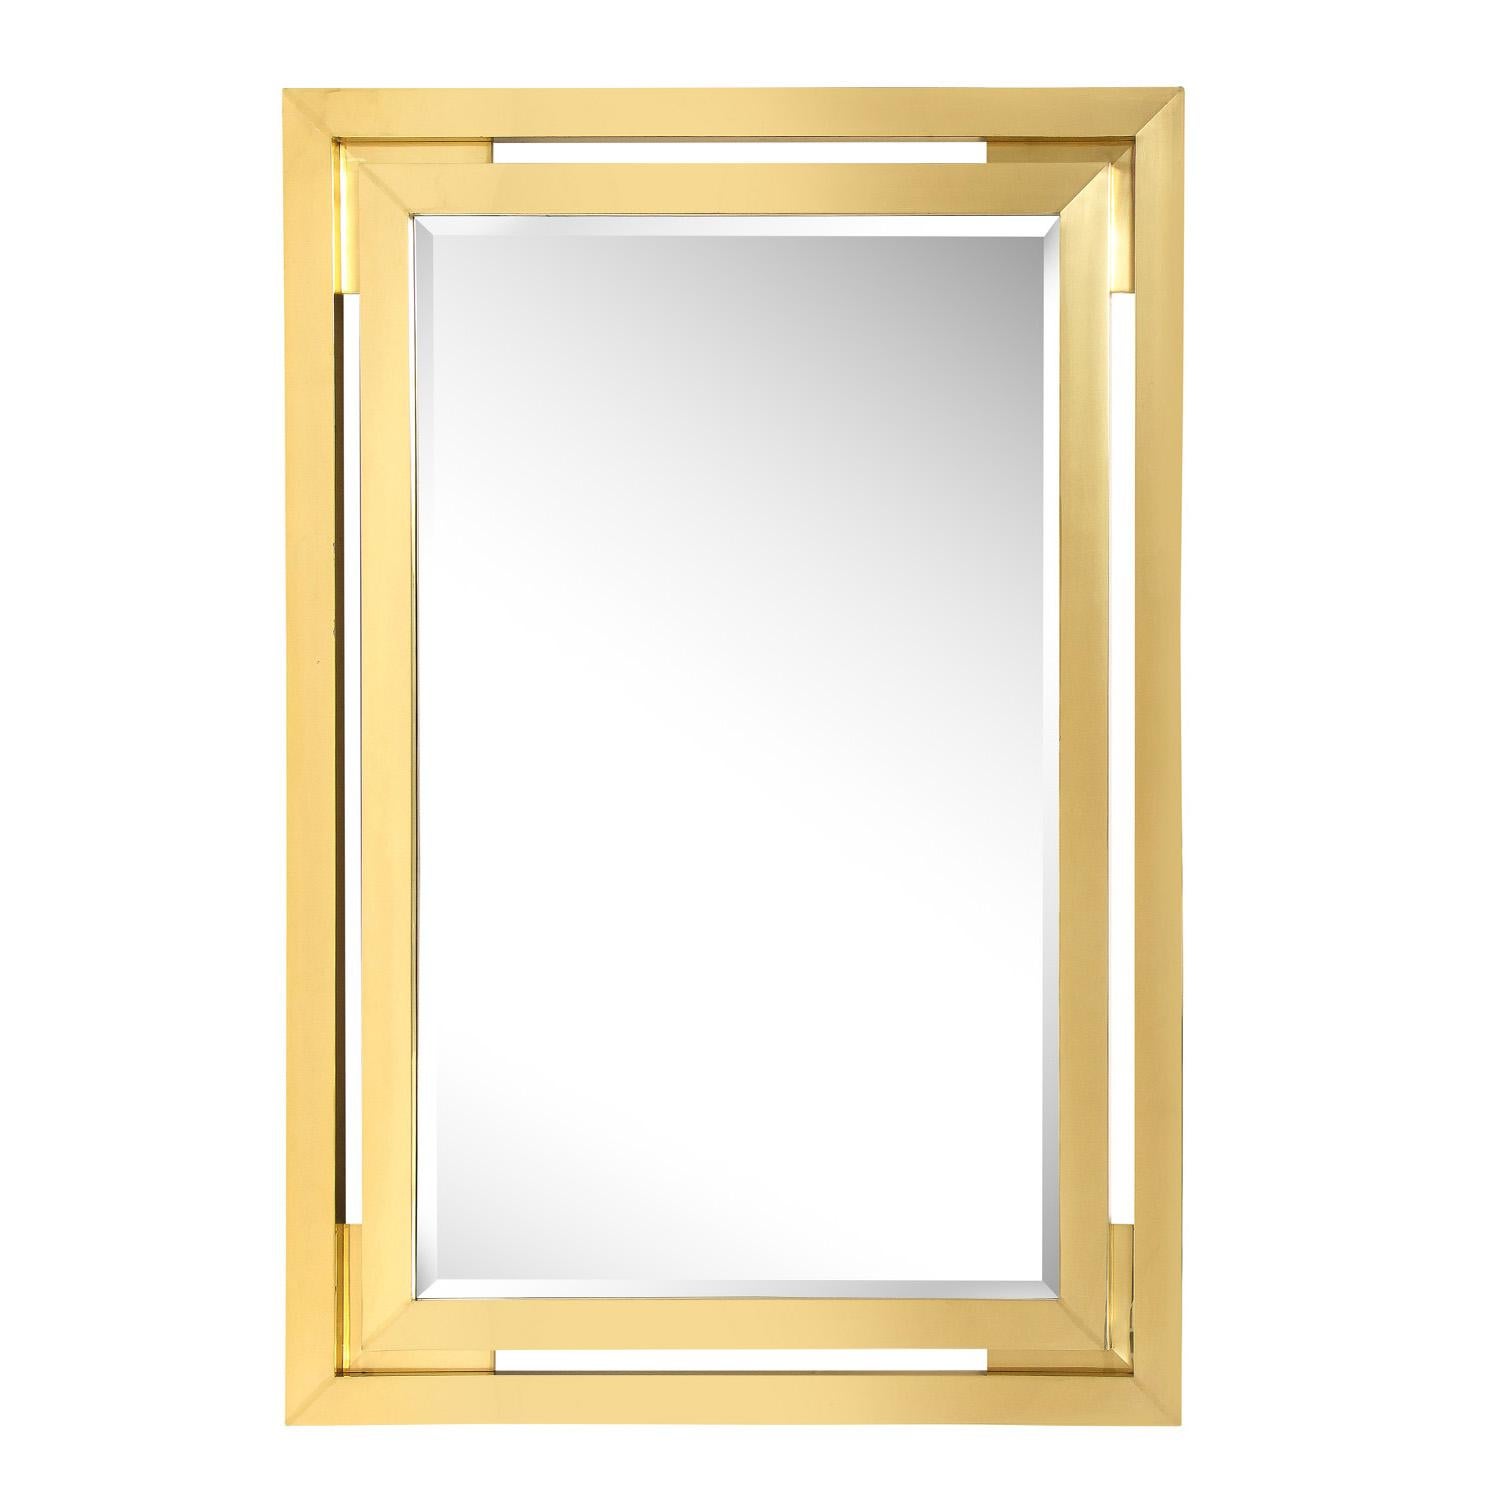 Beautifully crafted artisan mirror with double frame in polished brass with beveled mirror, custom design, American 1970s. This mirror is stunning. Great scale and materials.